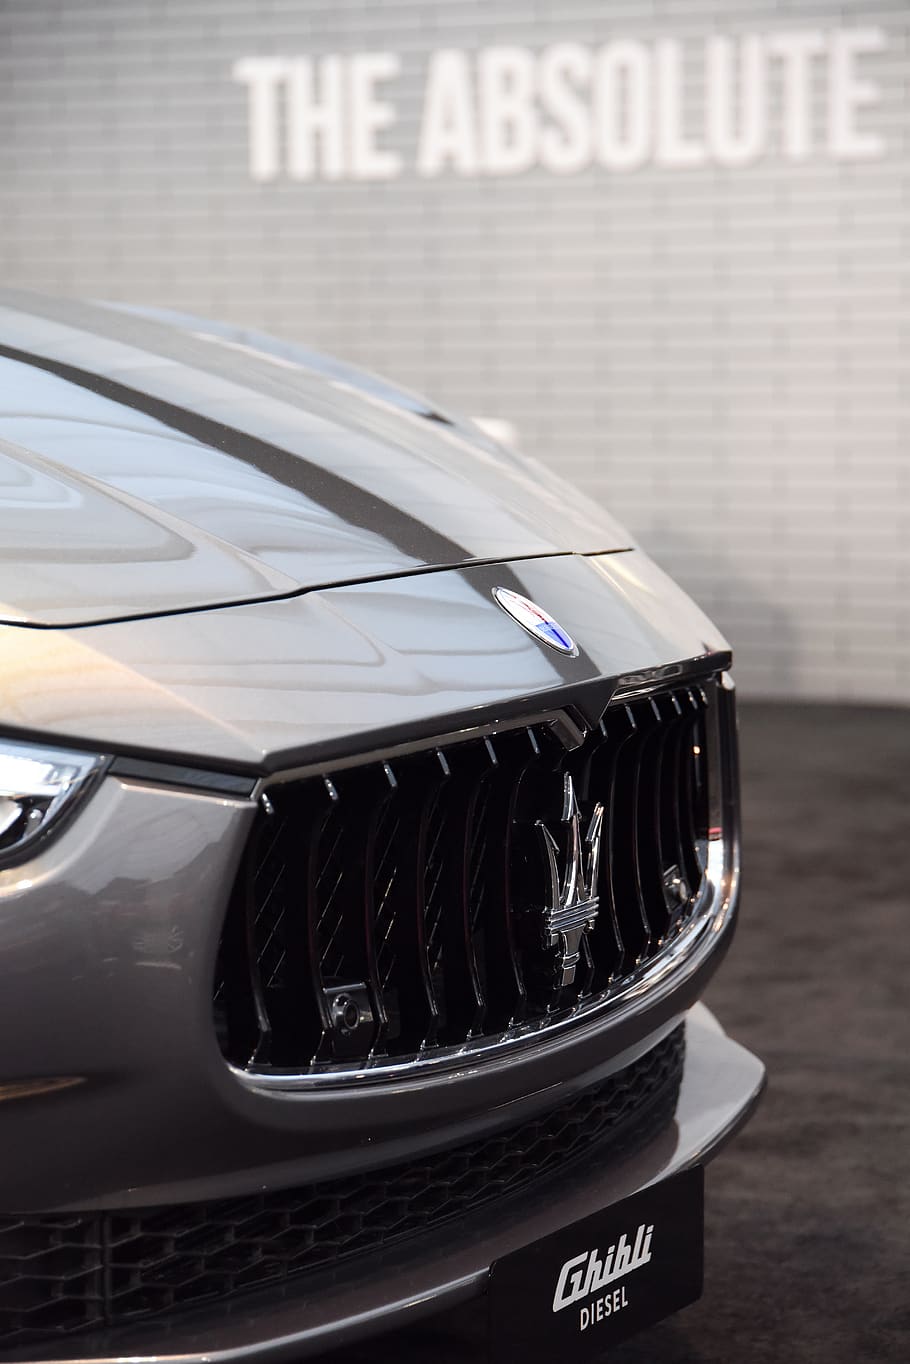 maserati, car, automobile, luxury, the absolute, sporty, transportation, mode of transportation, text, motor vehicle